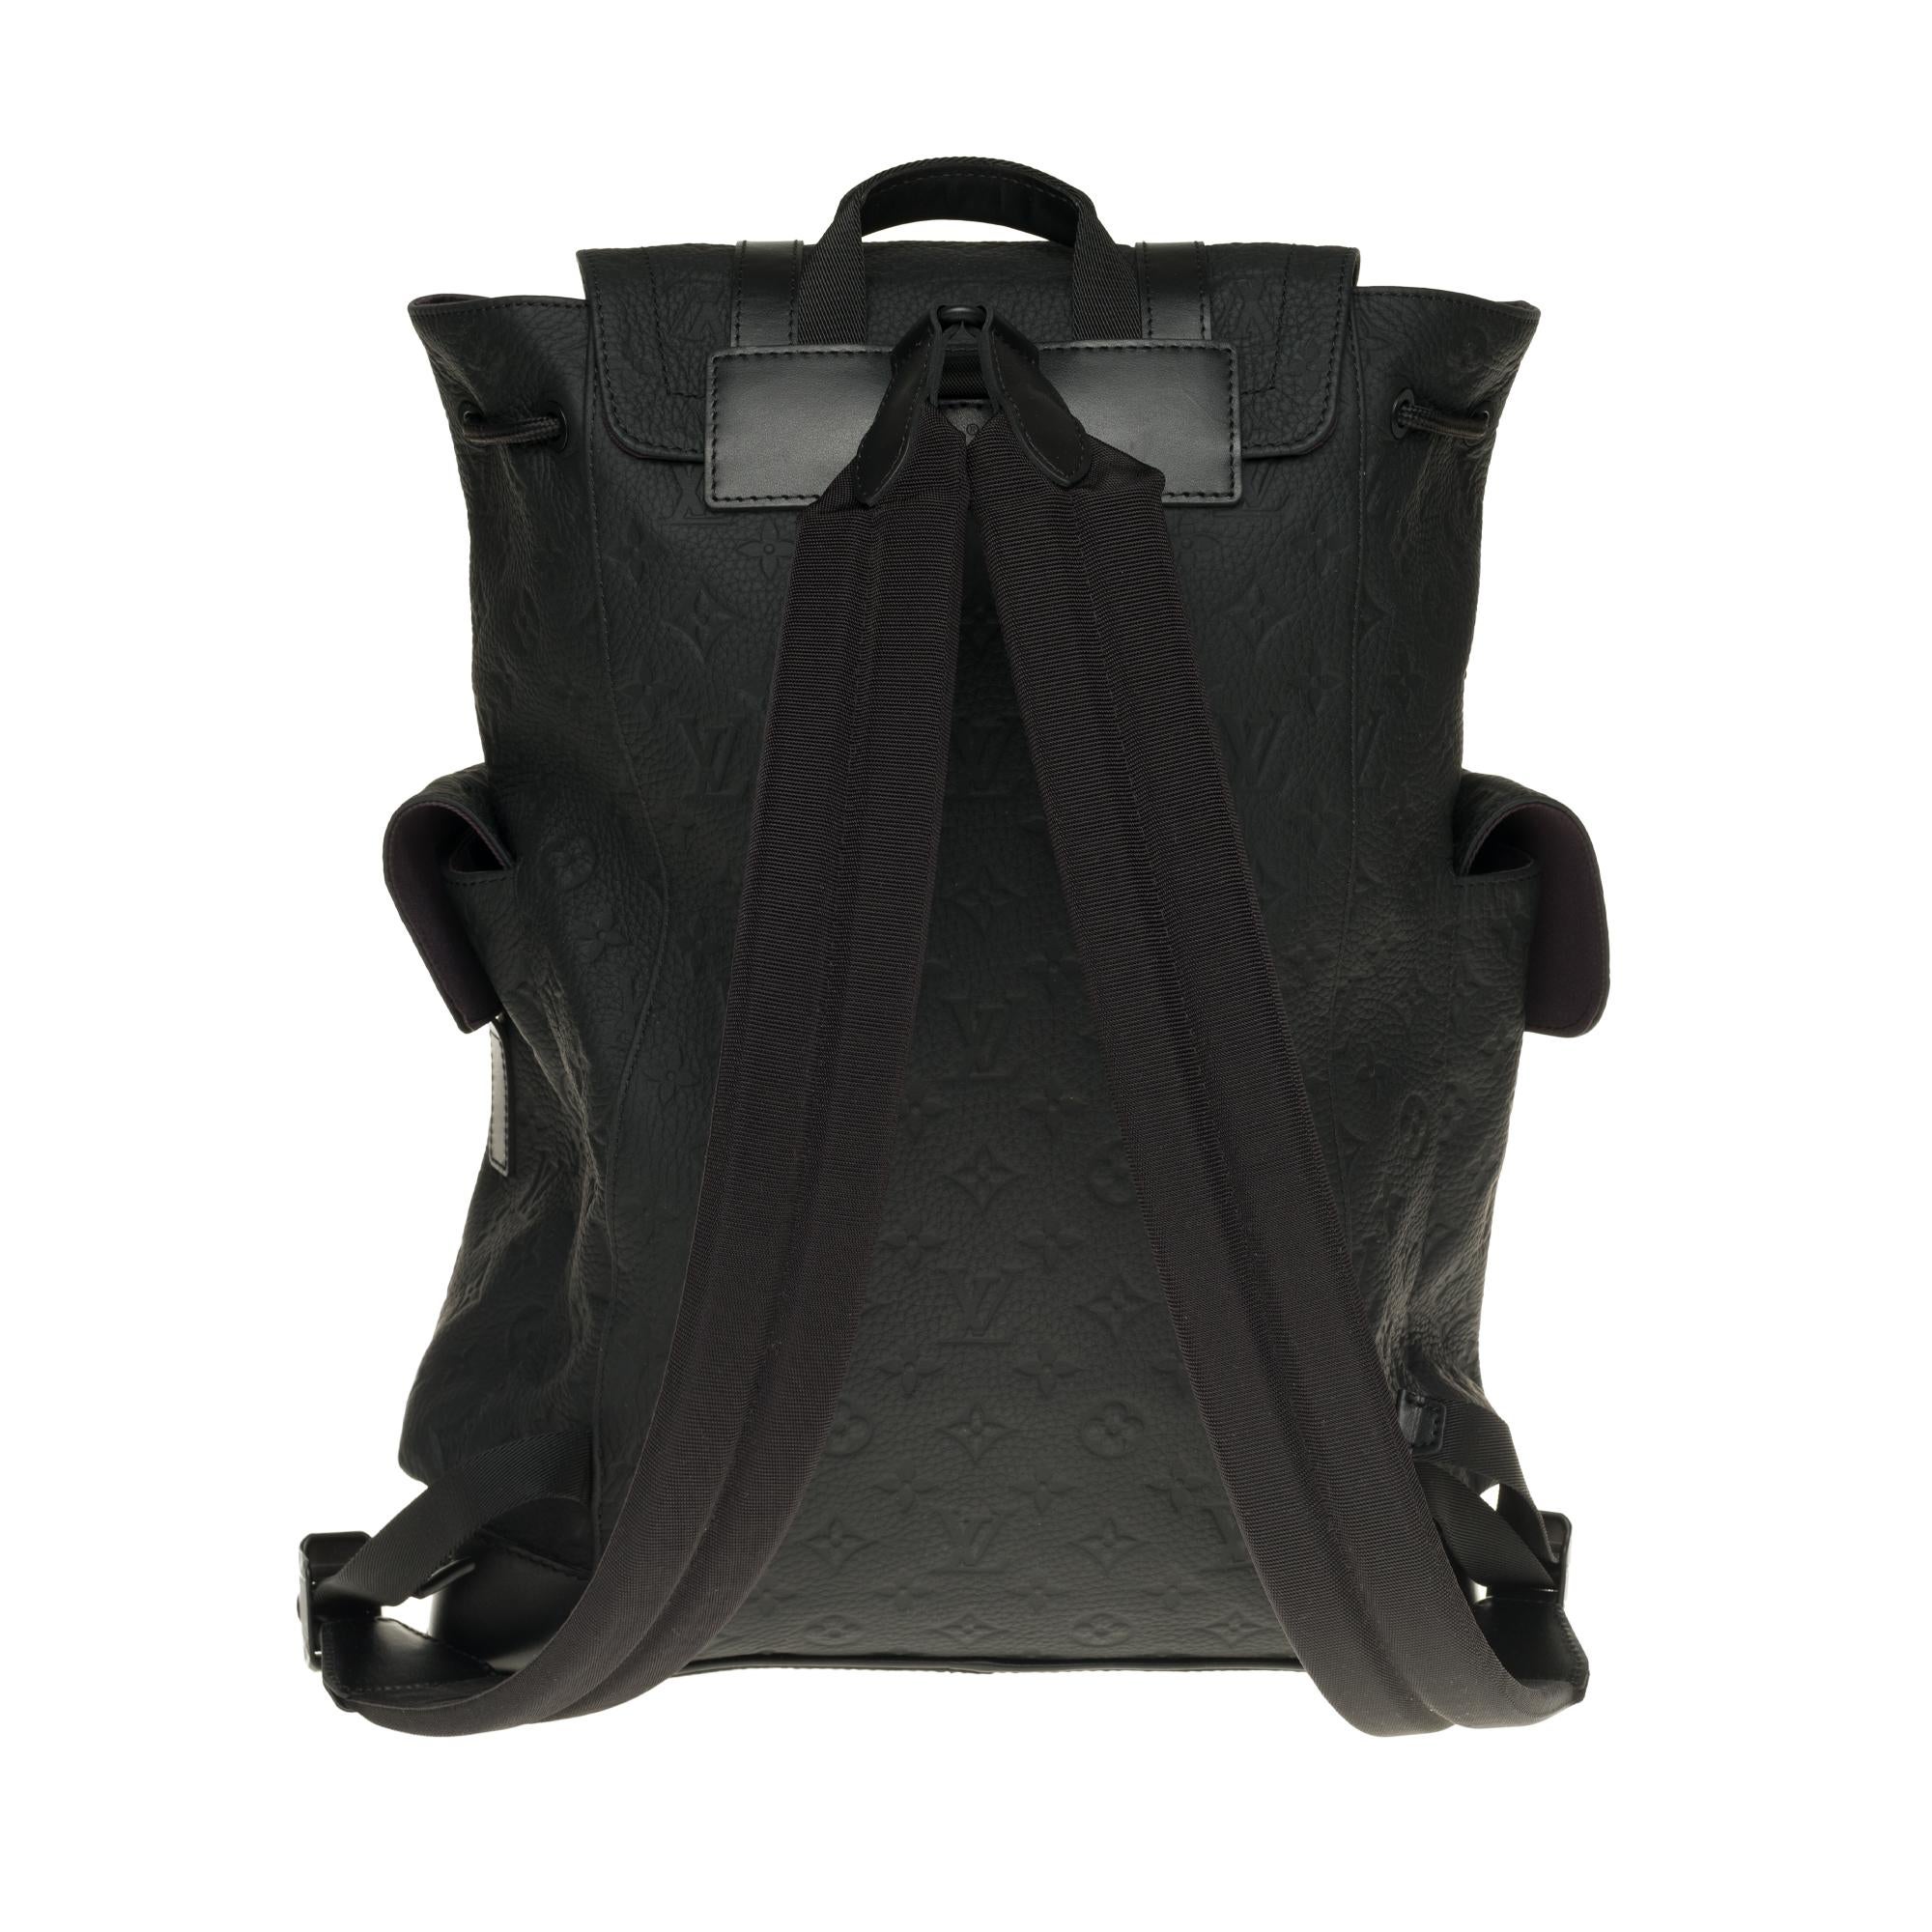 This medium-sized Christopher PM backpack offers two exterior side pockets and many functional interior pockets. Crafted from Taurillon leather embossed with the Monogram motif, it features black leather straps and matt black metal finishes. A snap